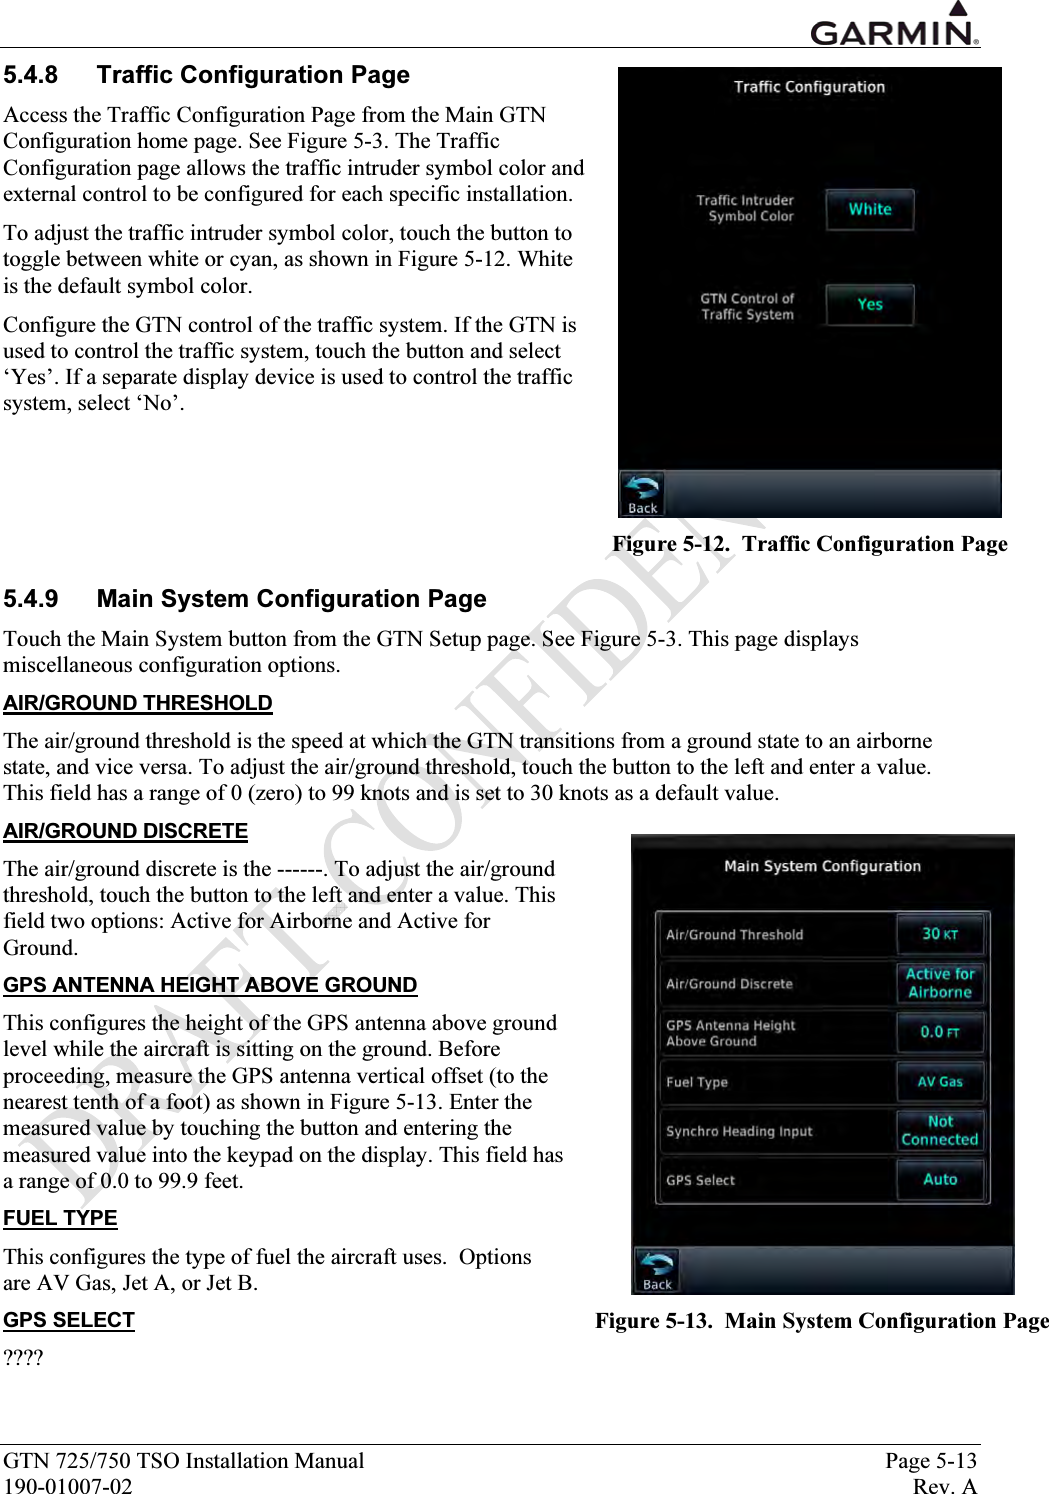  GTN 725/750 TSO Installation Manual  Page 5-13 190-01007-02  Rev. A 5.4.8  Traffic Configuration Page Access the Traffic Configuration Page from the Main GTN Configuration home page. See Figure 5-3. The Traffic Configuration page allows the traffic intruder symbol color and external control to be configured for each specific installation. To adjust the traffic intruder symbol color, touch the button to toggle between white or cyan, as shown in Figure 5-12. White is the default symbol color. Configure the GTN control of the traffic system. If the GTN is used to control the traffic system, touch the button and select ‘Yes’. If a separate display device is used to control the traffic system, select ‘No’.     5.4.9  Main System Configuration Page Touch the Main System button from the GTN Setup page. See Figure 5-3. This page displays miscellaneous configuration options. AIR/GROUND THRESHOLD The air/ground threshold is the speed at which the GTN transitions from a ground state to an airborne state, and vice versa. To adjust the air/ground threshold, touch the button to the left and enter a value. This field has a range of 0 (zero) to 99 knots and is set to 30 knots as a default value. AIR/GROUND DISCRETE The air/ground discrete is the ------. To adjust the air/ground threshold, touch the button to the left and enter a value. This field two options: Active for Airborne and Active for Ground. GPS ANTENNA HEIGHT ABOVE GROUND This configures the height of the GPS antenna above ground level while the aircraft is sitting on the ground. Before proceeding, measure the GPS antenna vertical offset (to the nearest tenth of a foot) as shown in Figure 5-13. Enter the measured value by touching the button and entering the measured value into the keypad on the display. This field has a range of 0.0 to 99.9 feet. FUEL TYPE This configures the type of fuel the aircraft uses.  Options are AV Gas, Jet A, or Jet B. GPS SELECT ????  Figure 5-12.  Traffic Configuration Page  Figure 5-13.  Main System Configuration Page 